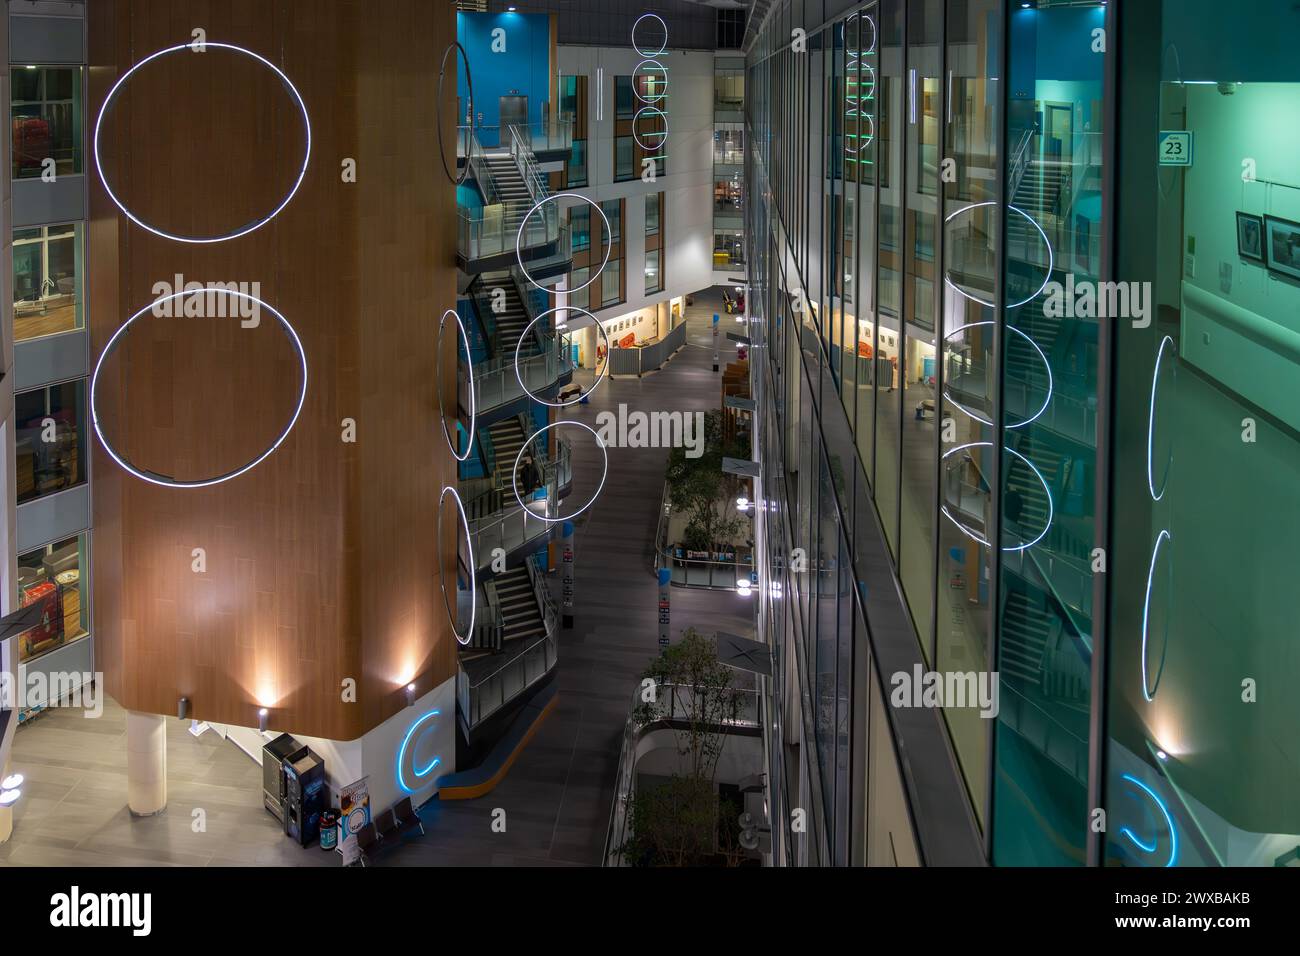 Elevated view of a spacious, well-lit corporate building interior with artistic light fixtures after hours Stock Photo